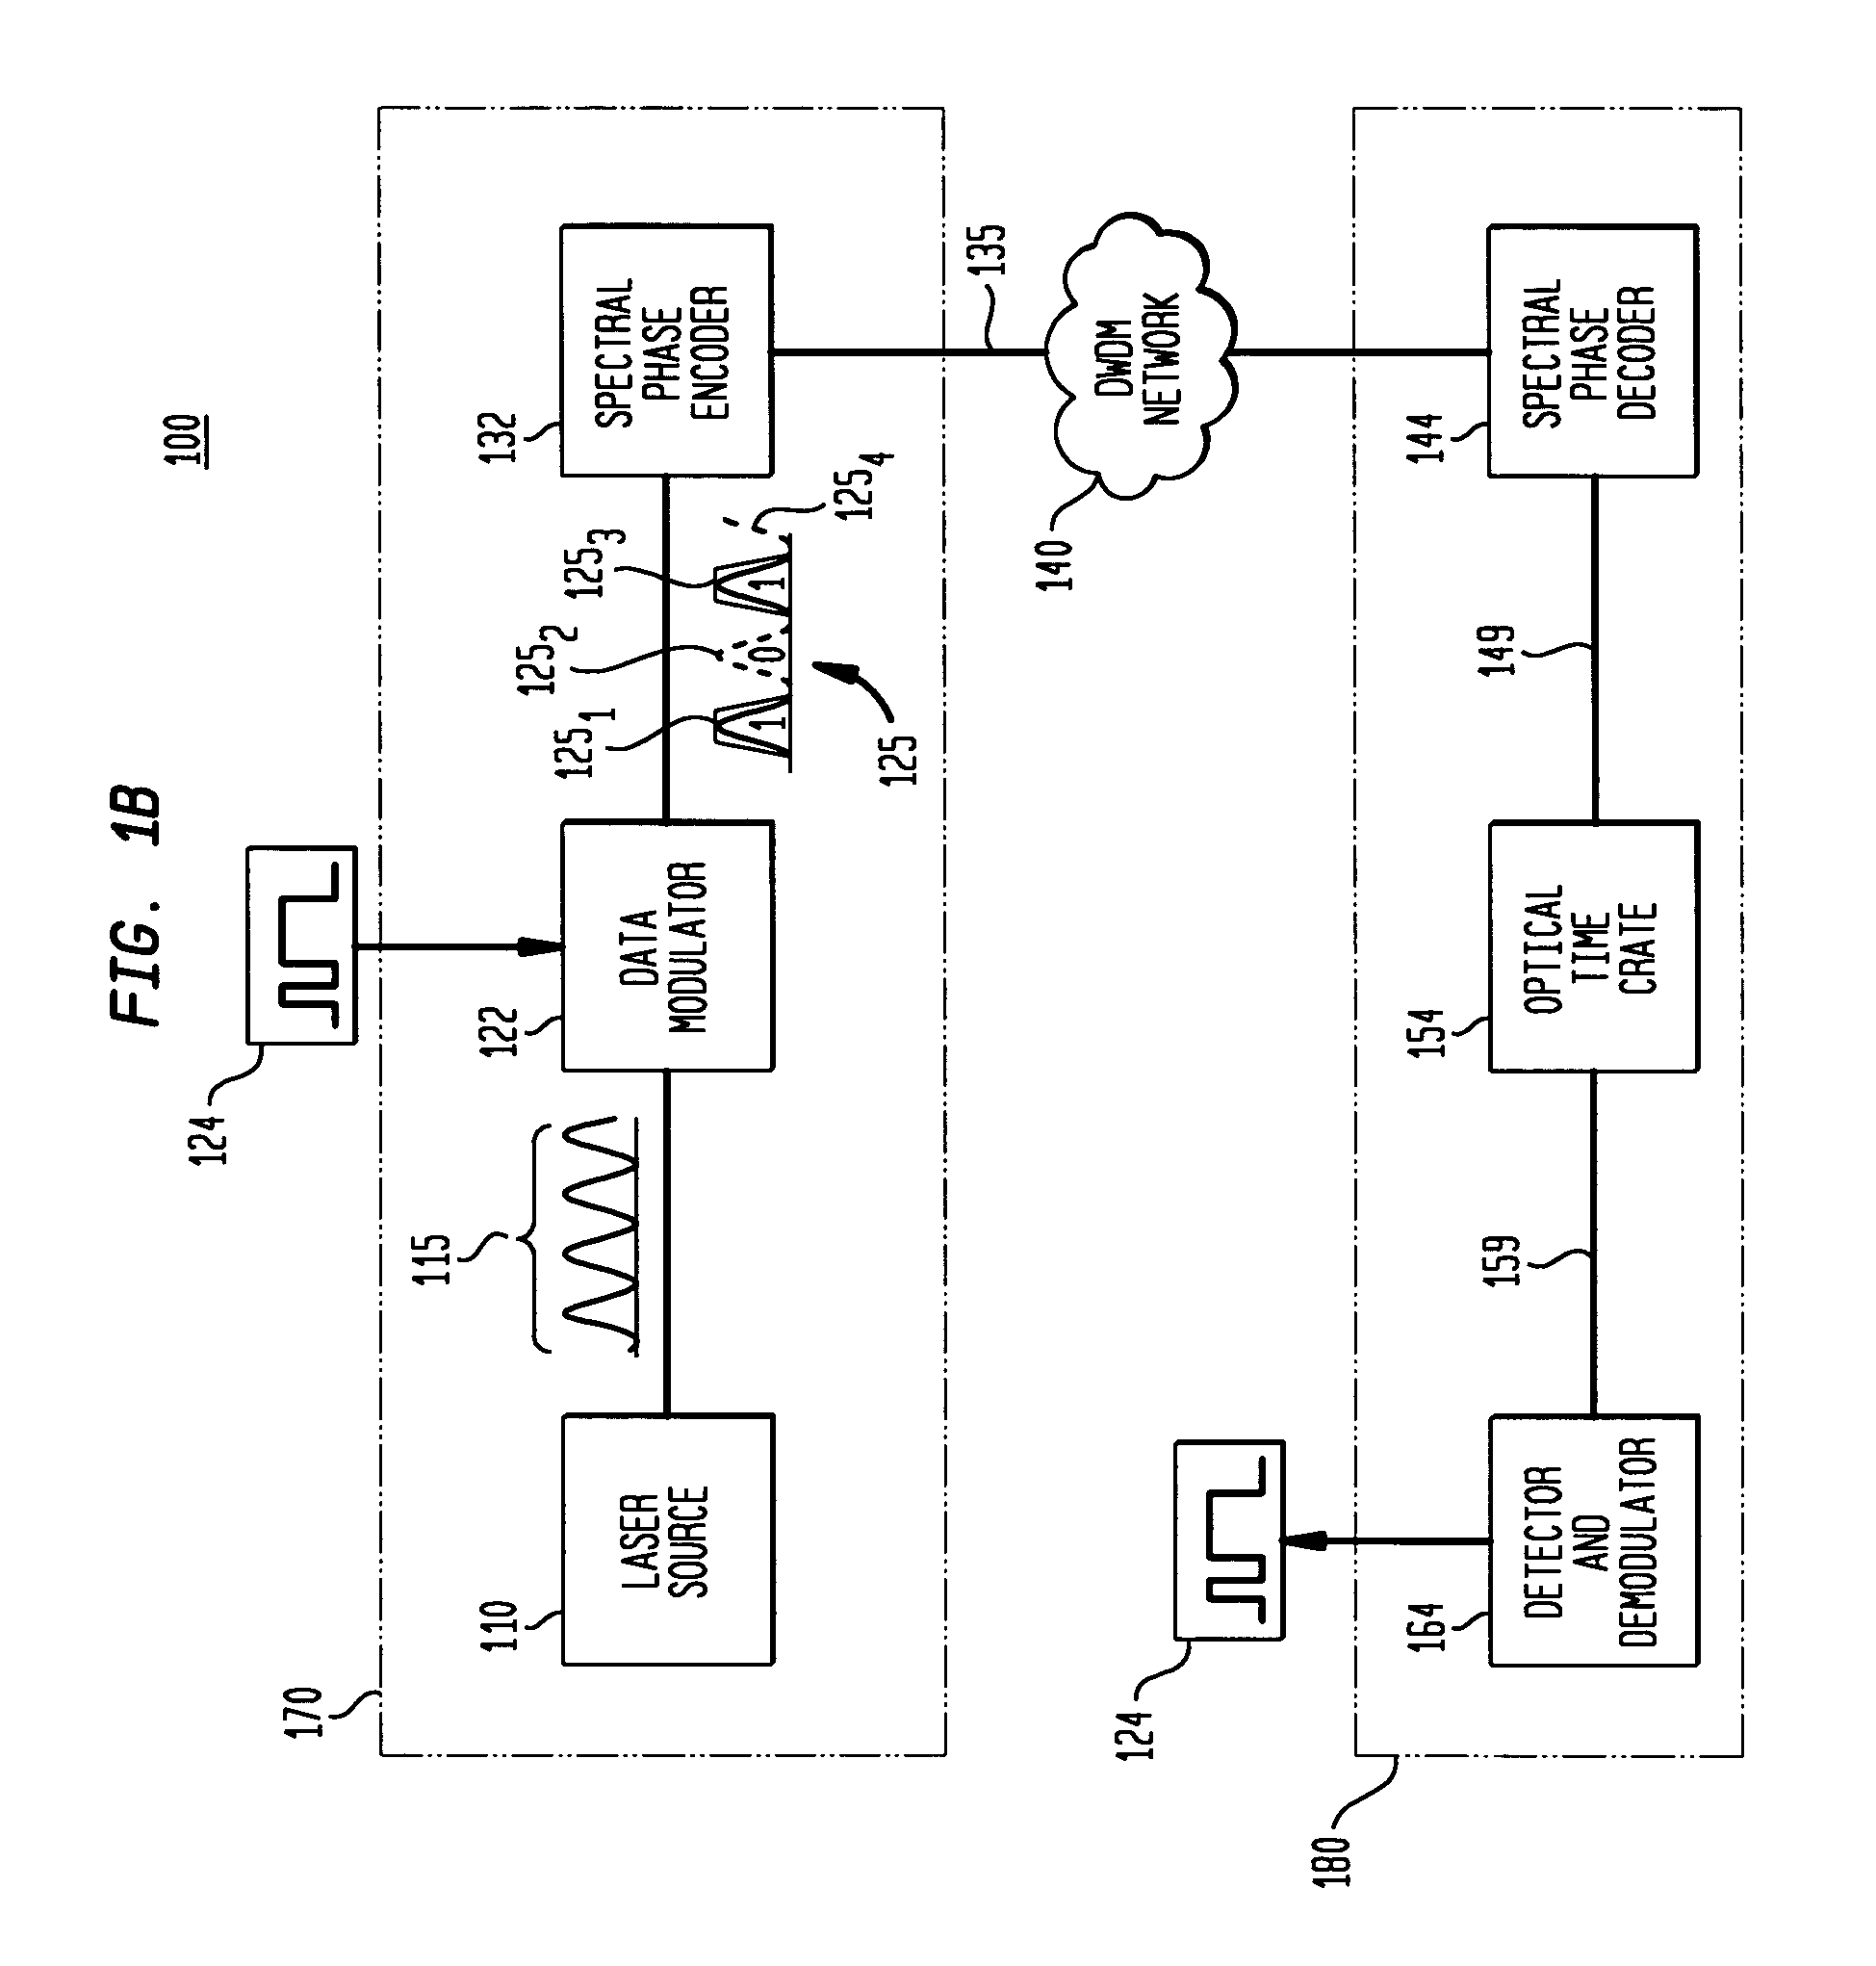 Spectrally phase encoded optical code division multiple access system